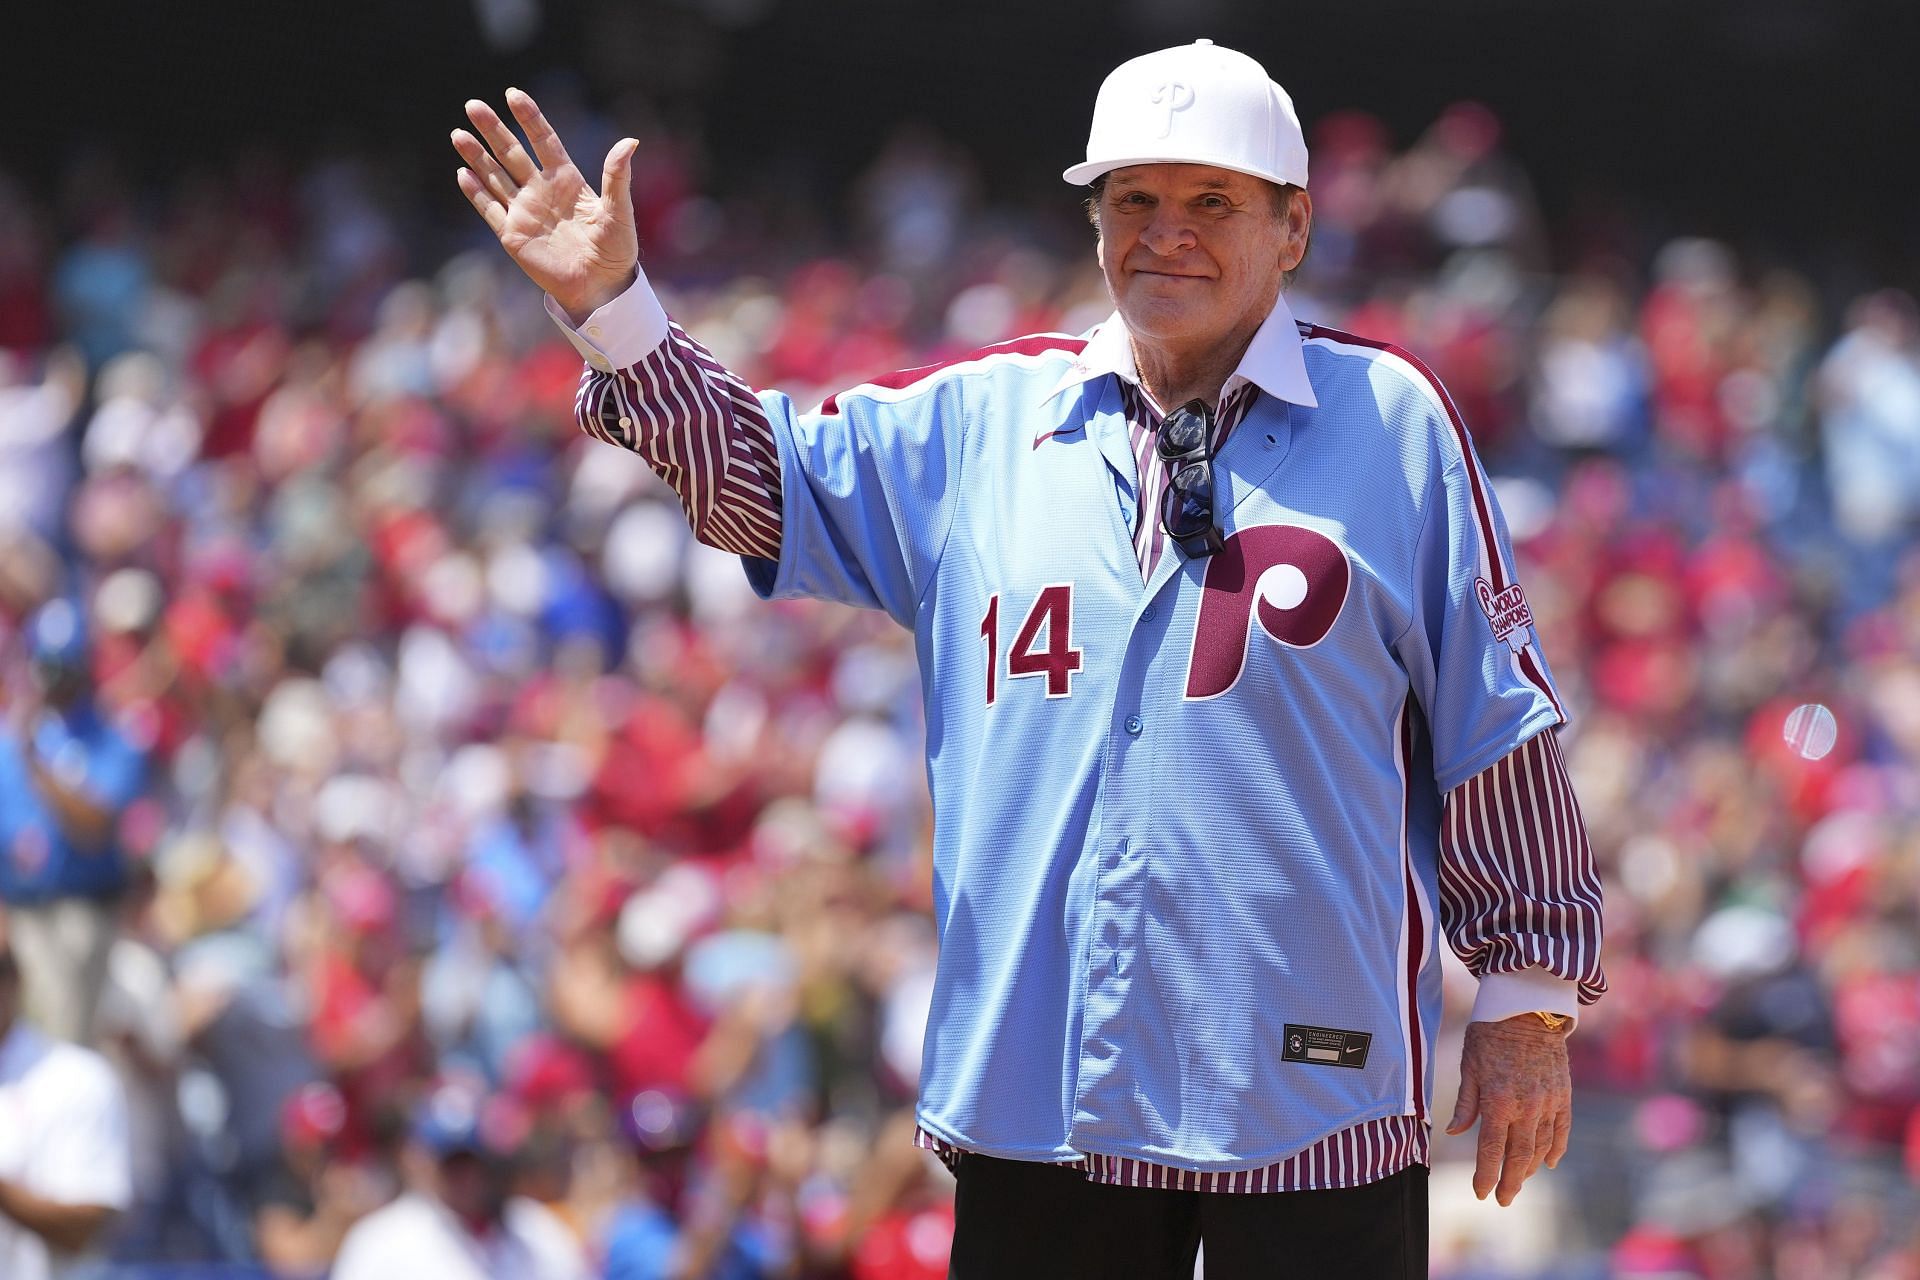 ESPN says it obtained notebook showing Pete Rose bet on Reds games